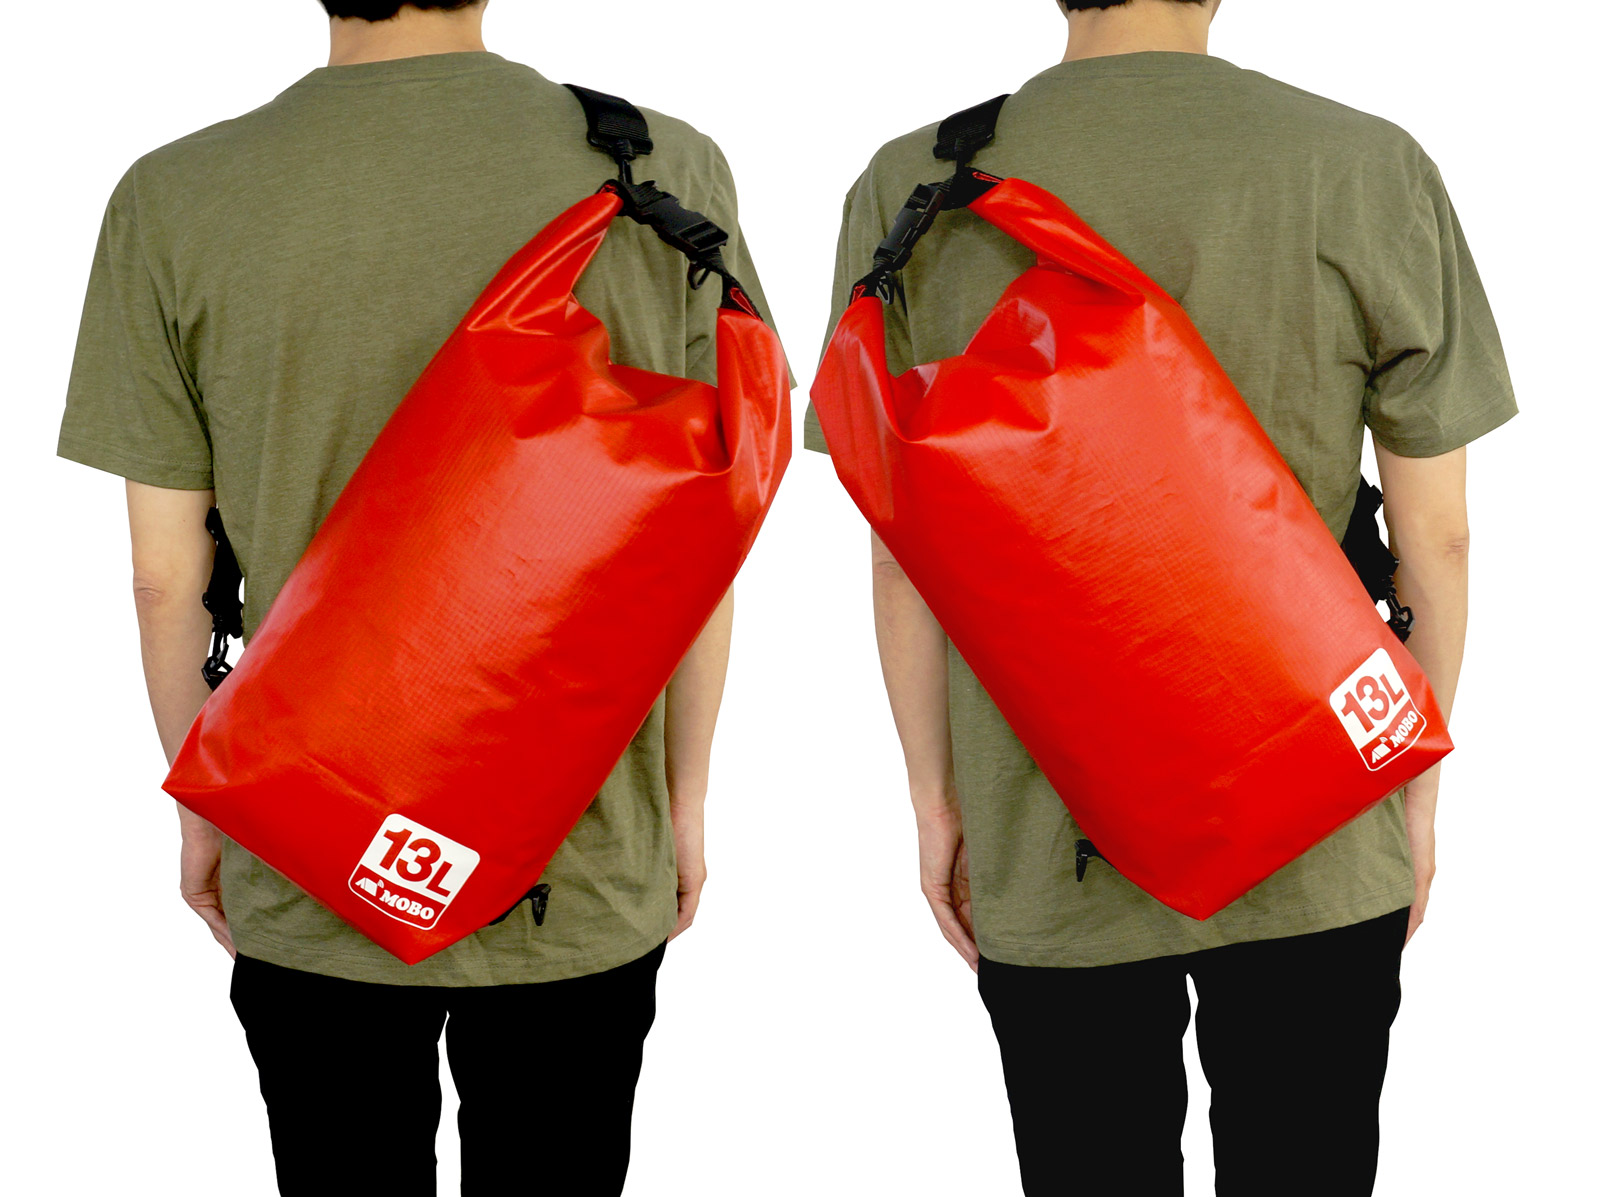 Water Sports Dry Bag | MOBO